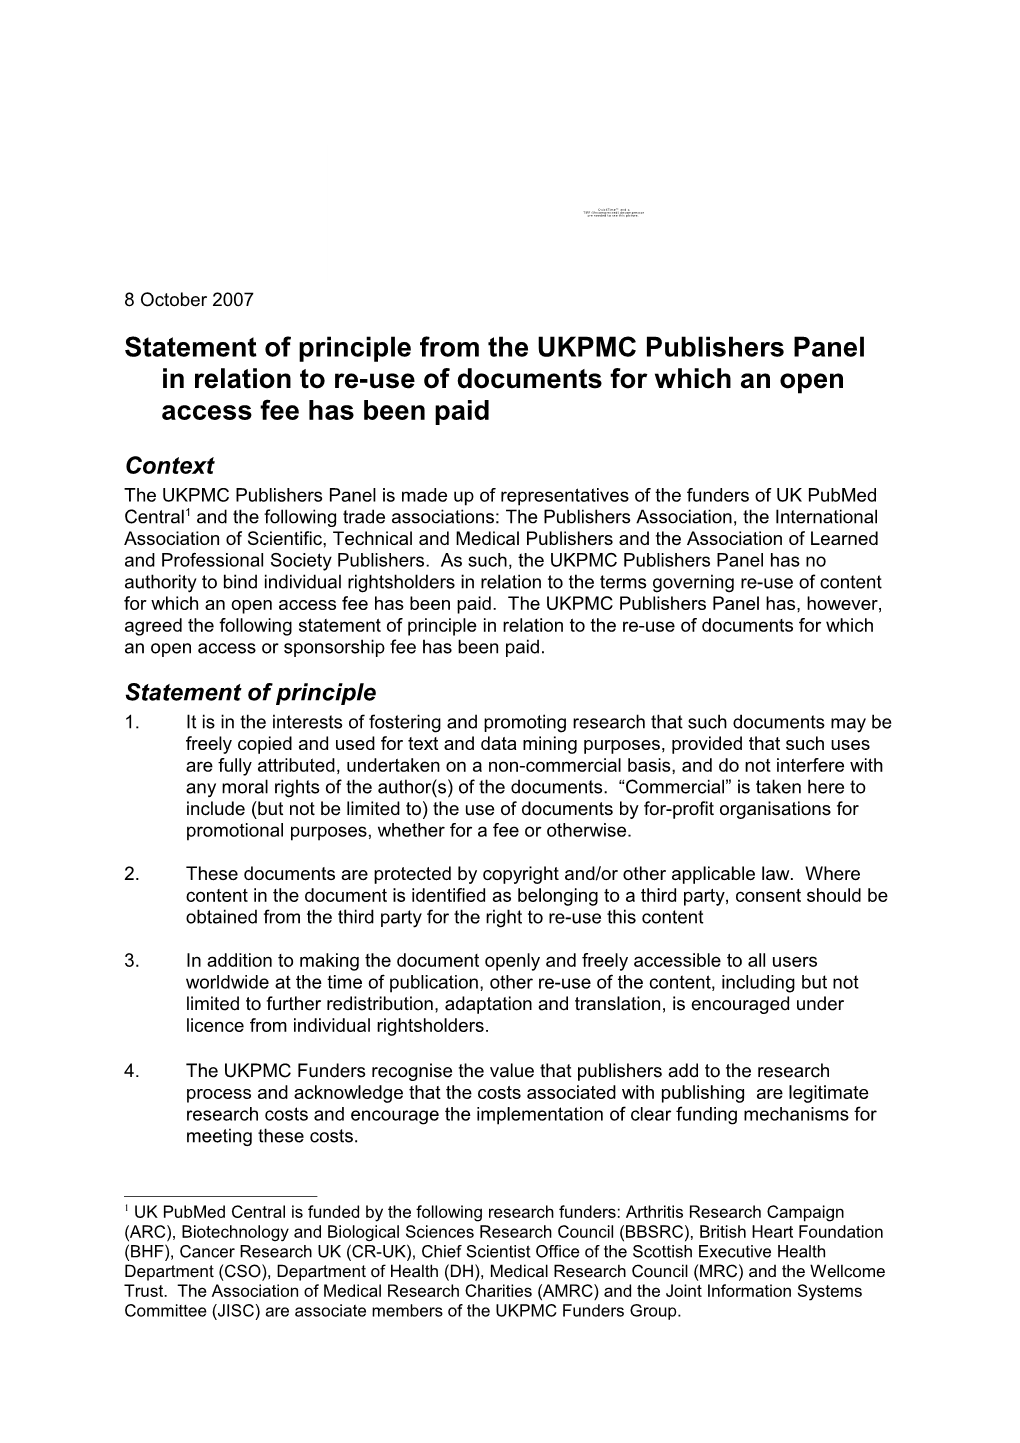 The UKPMC Publishers Panel Is Made up of Representatives of the Funders of UK Pubmed Central